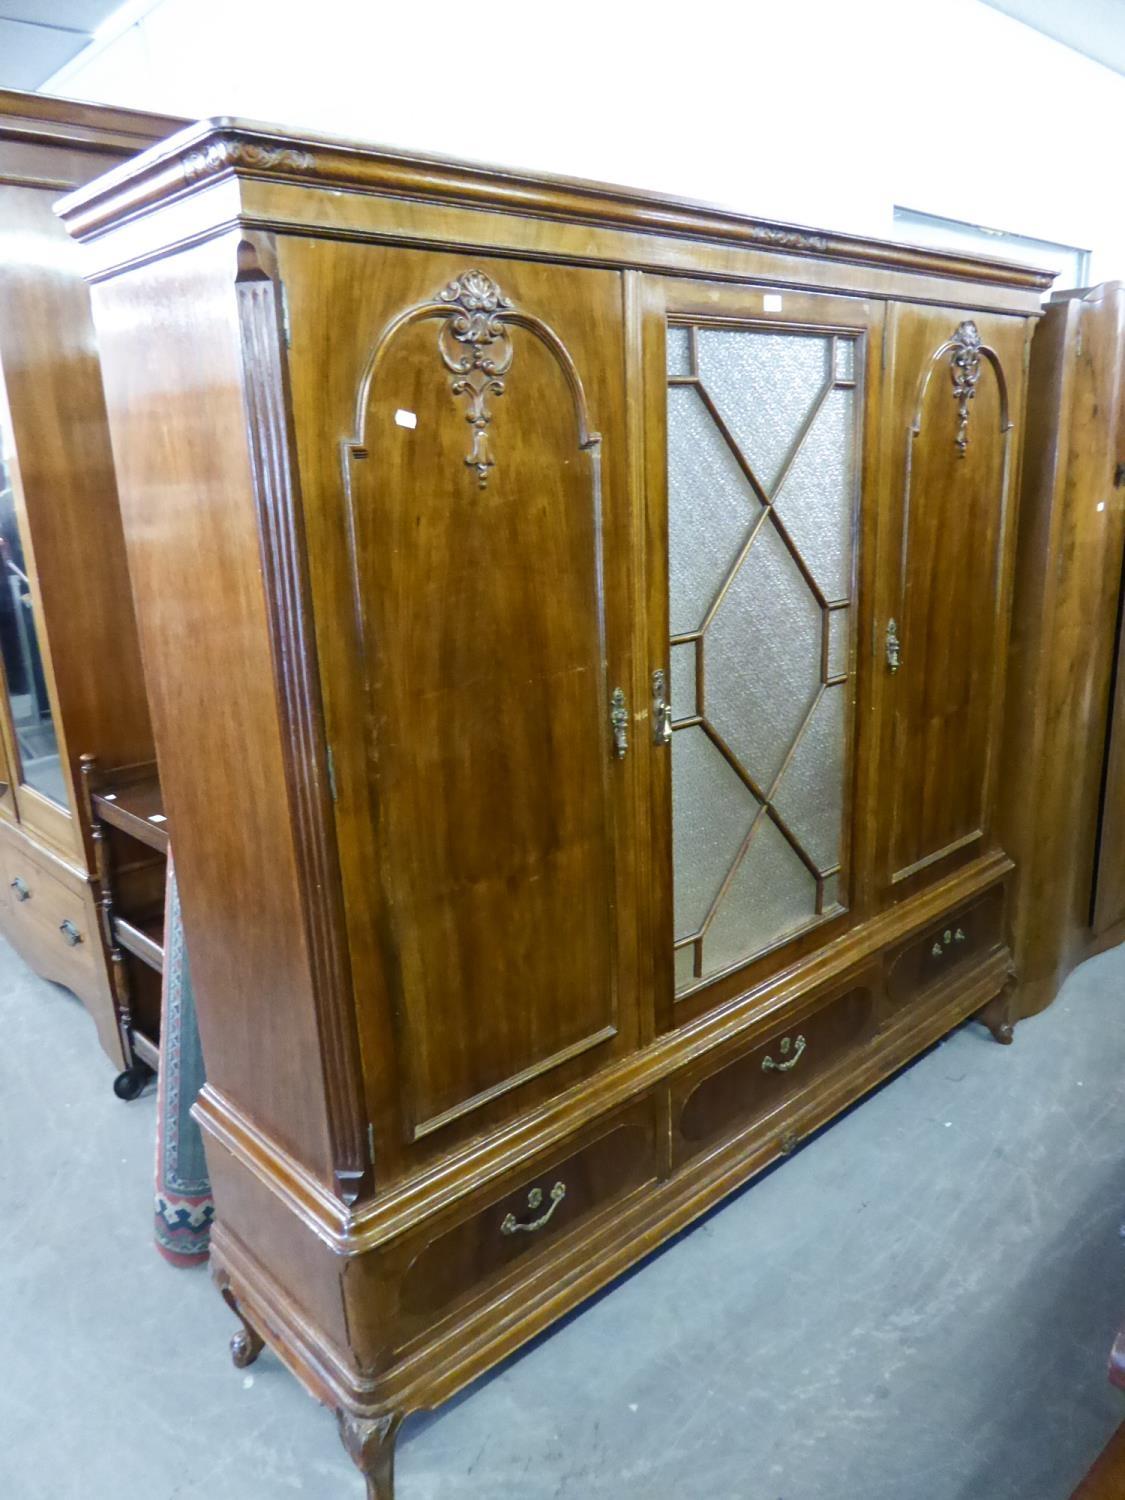 EARLY 20th CENTURY CONTINENTAL MAHOGANY LARGE SIDE CABINET, WITH OBSCURE GLAZED CENTRE DOOR WITH